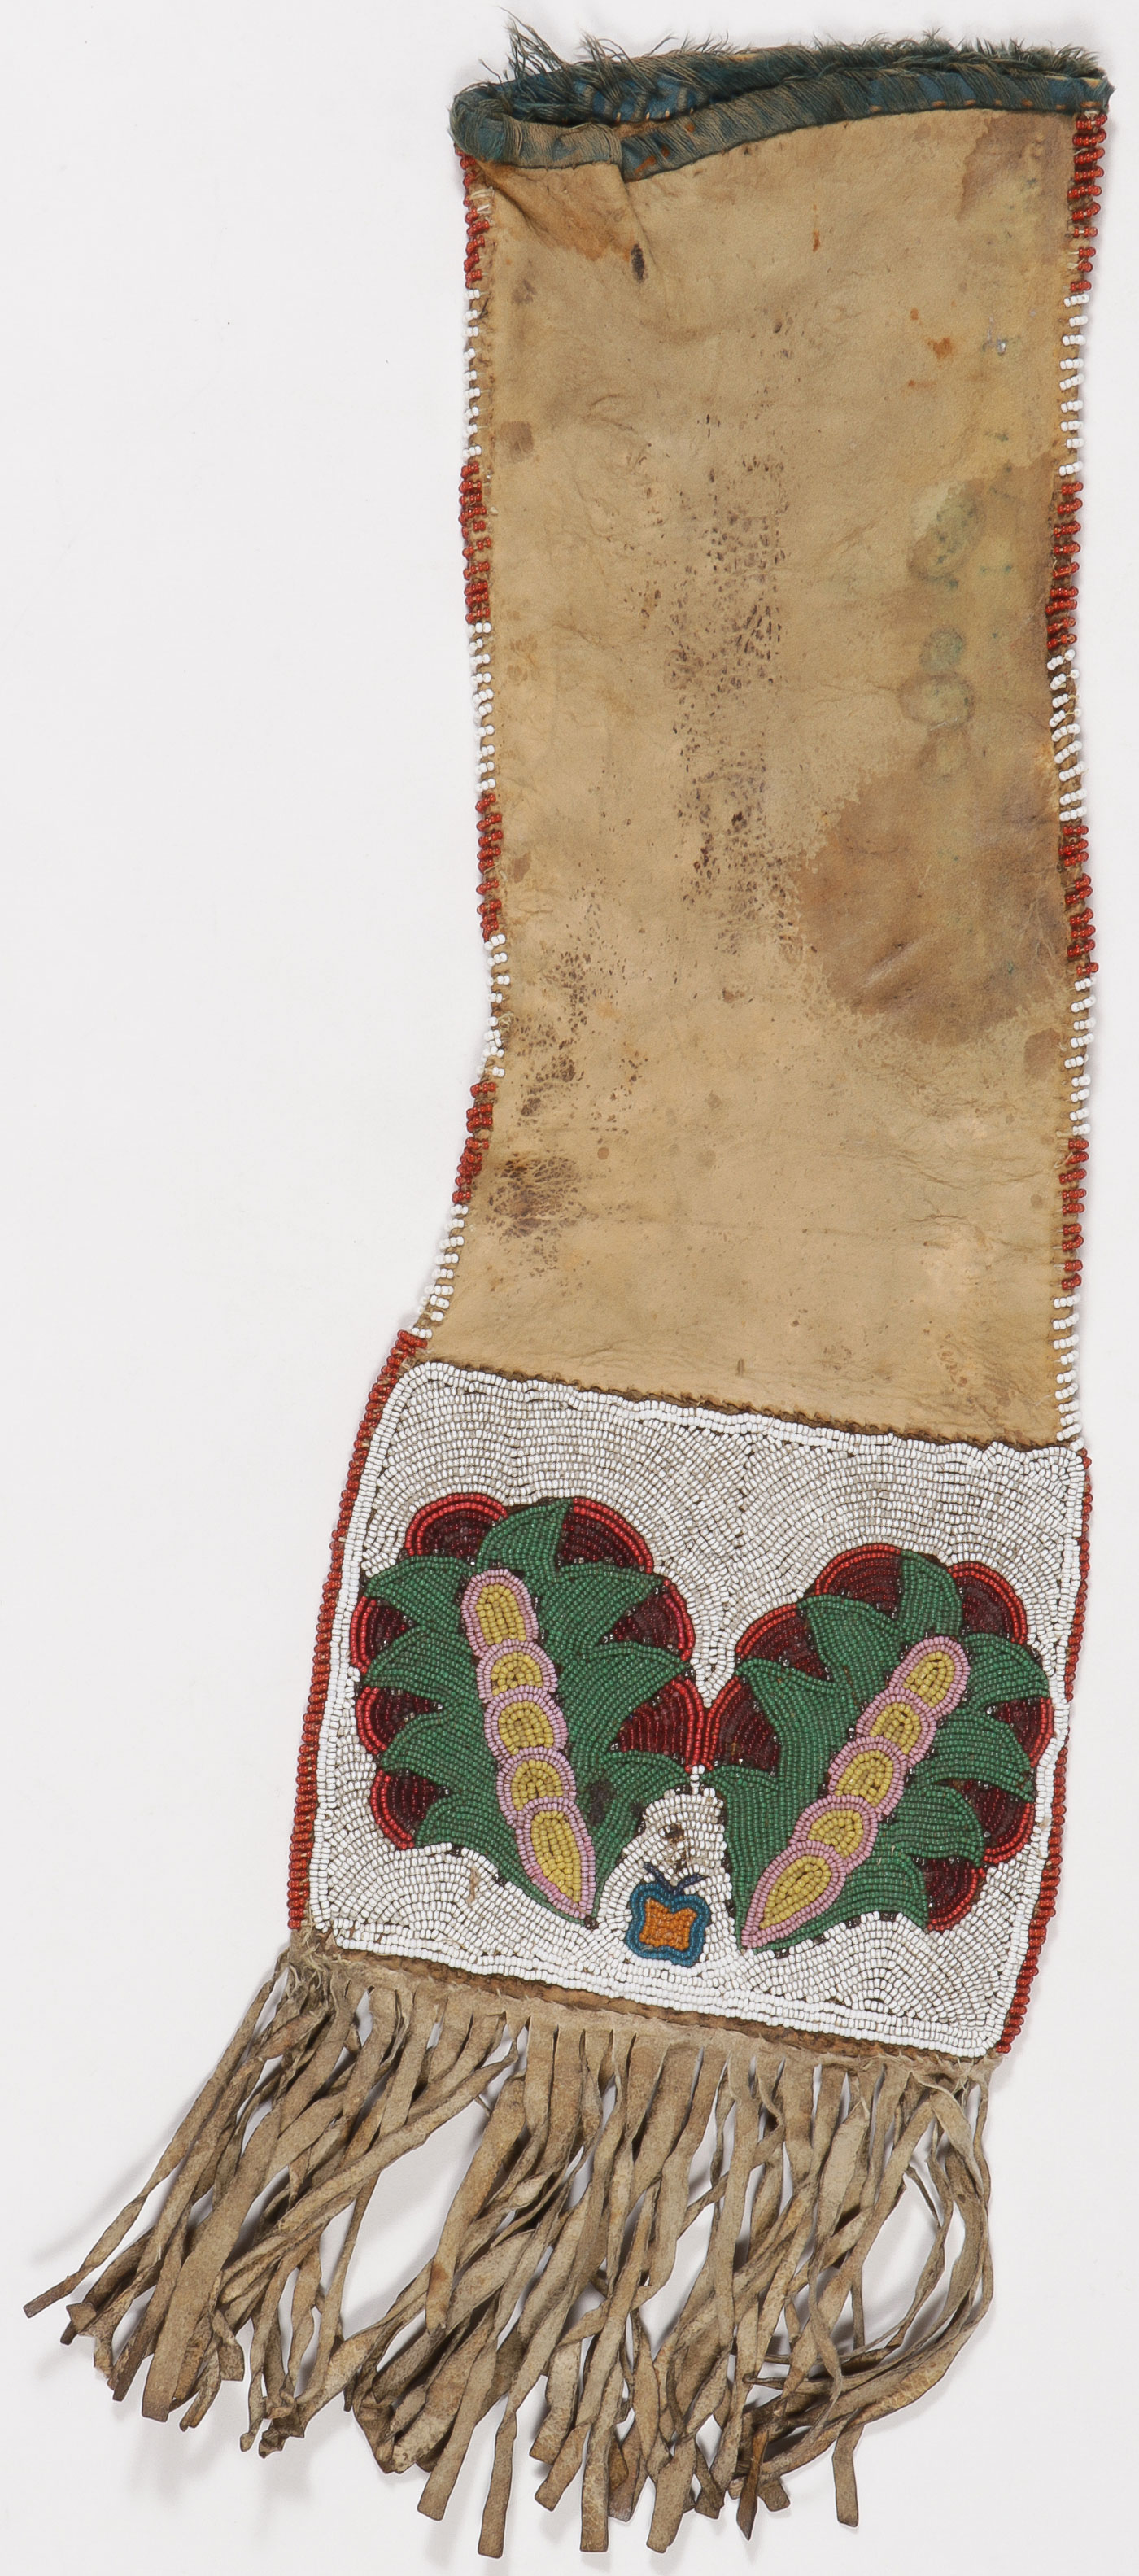 A BEADED PIPE BAG, PROBABLY BLACK FOOT, C. 1870 - Image 2 of 2